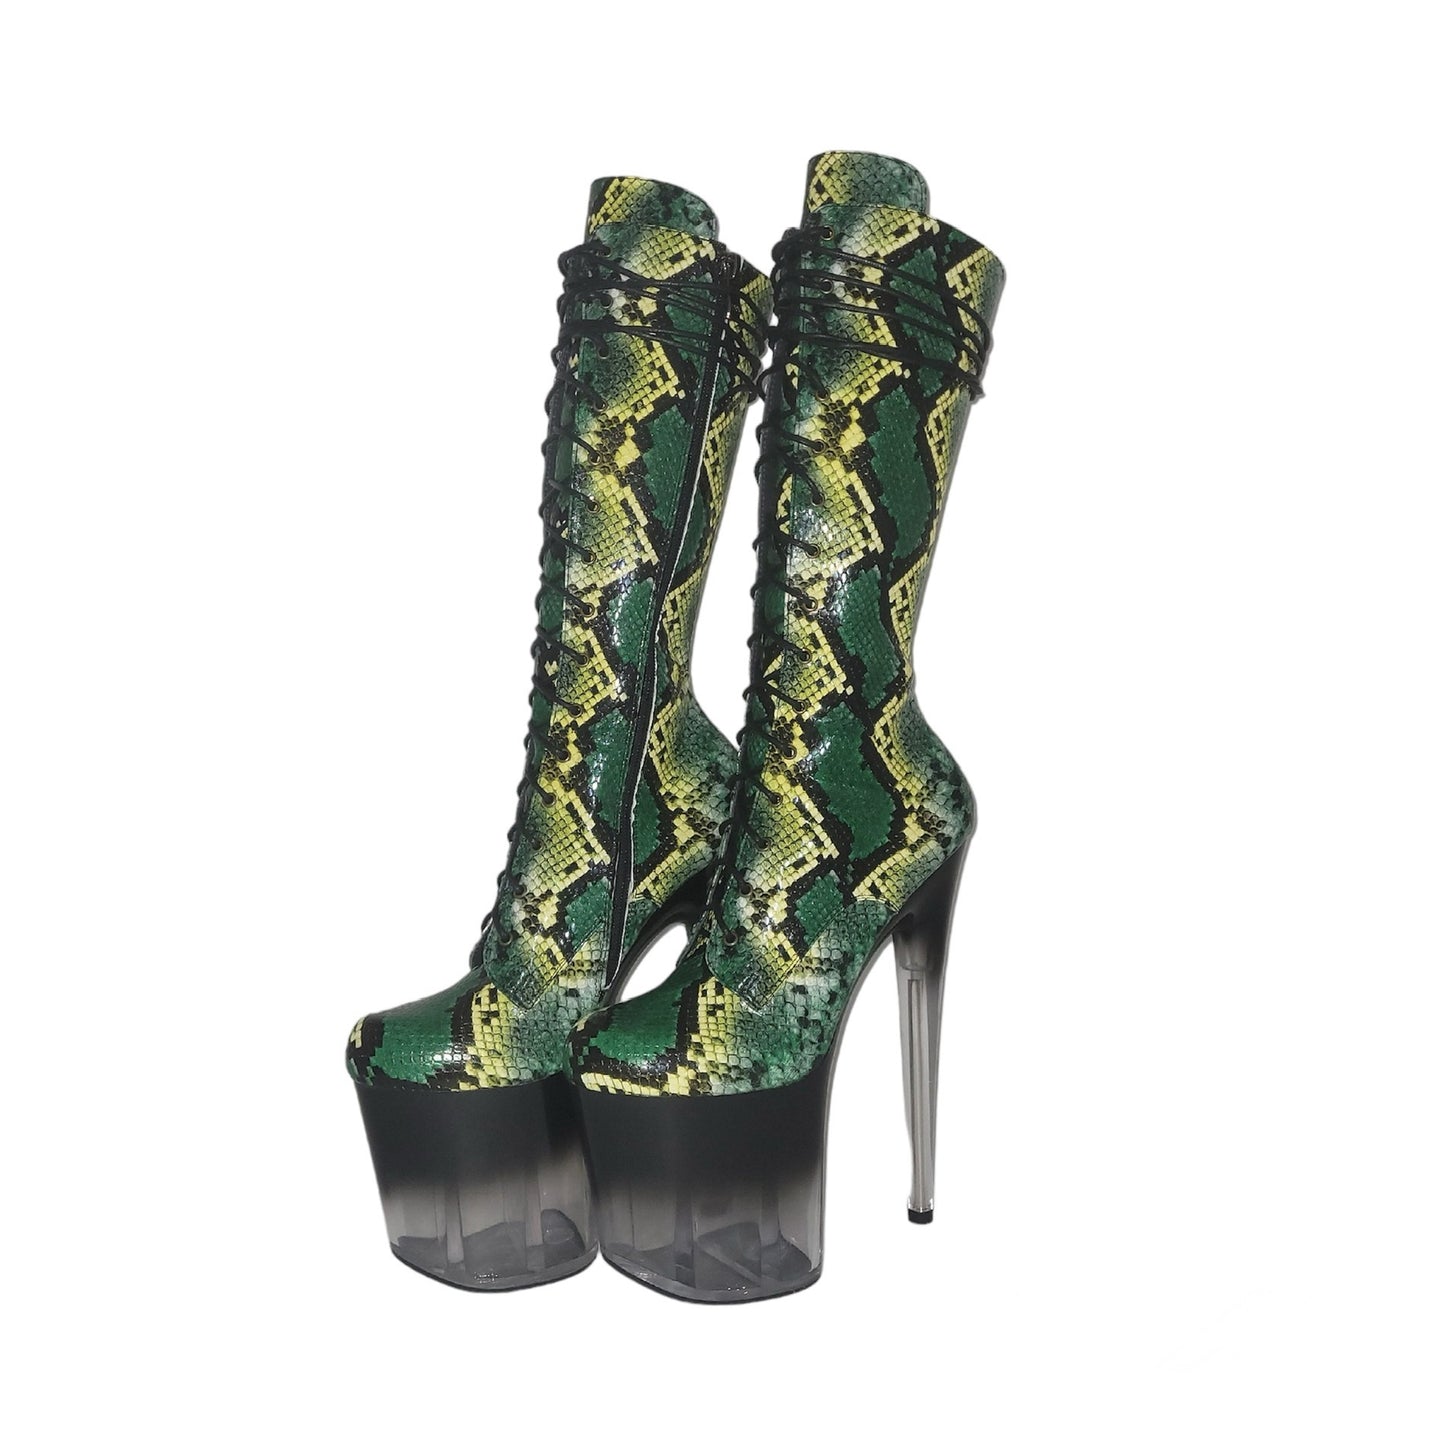 Green snakeskin vegan leather smoky ombre translucent platform ankle - mid calf boots